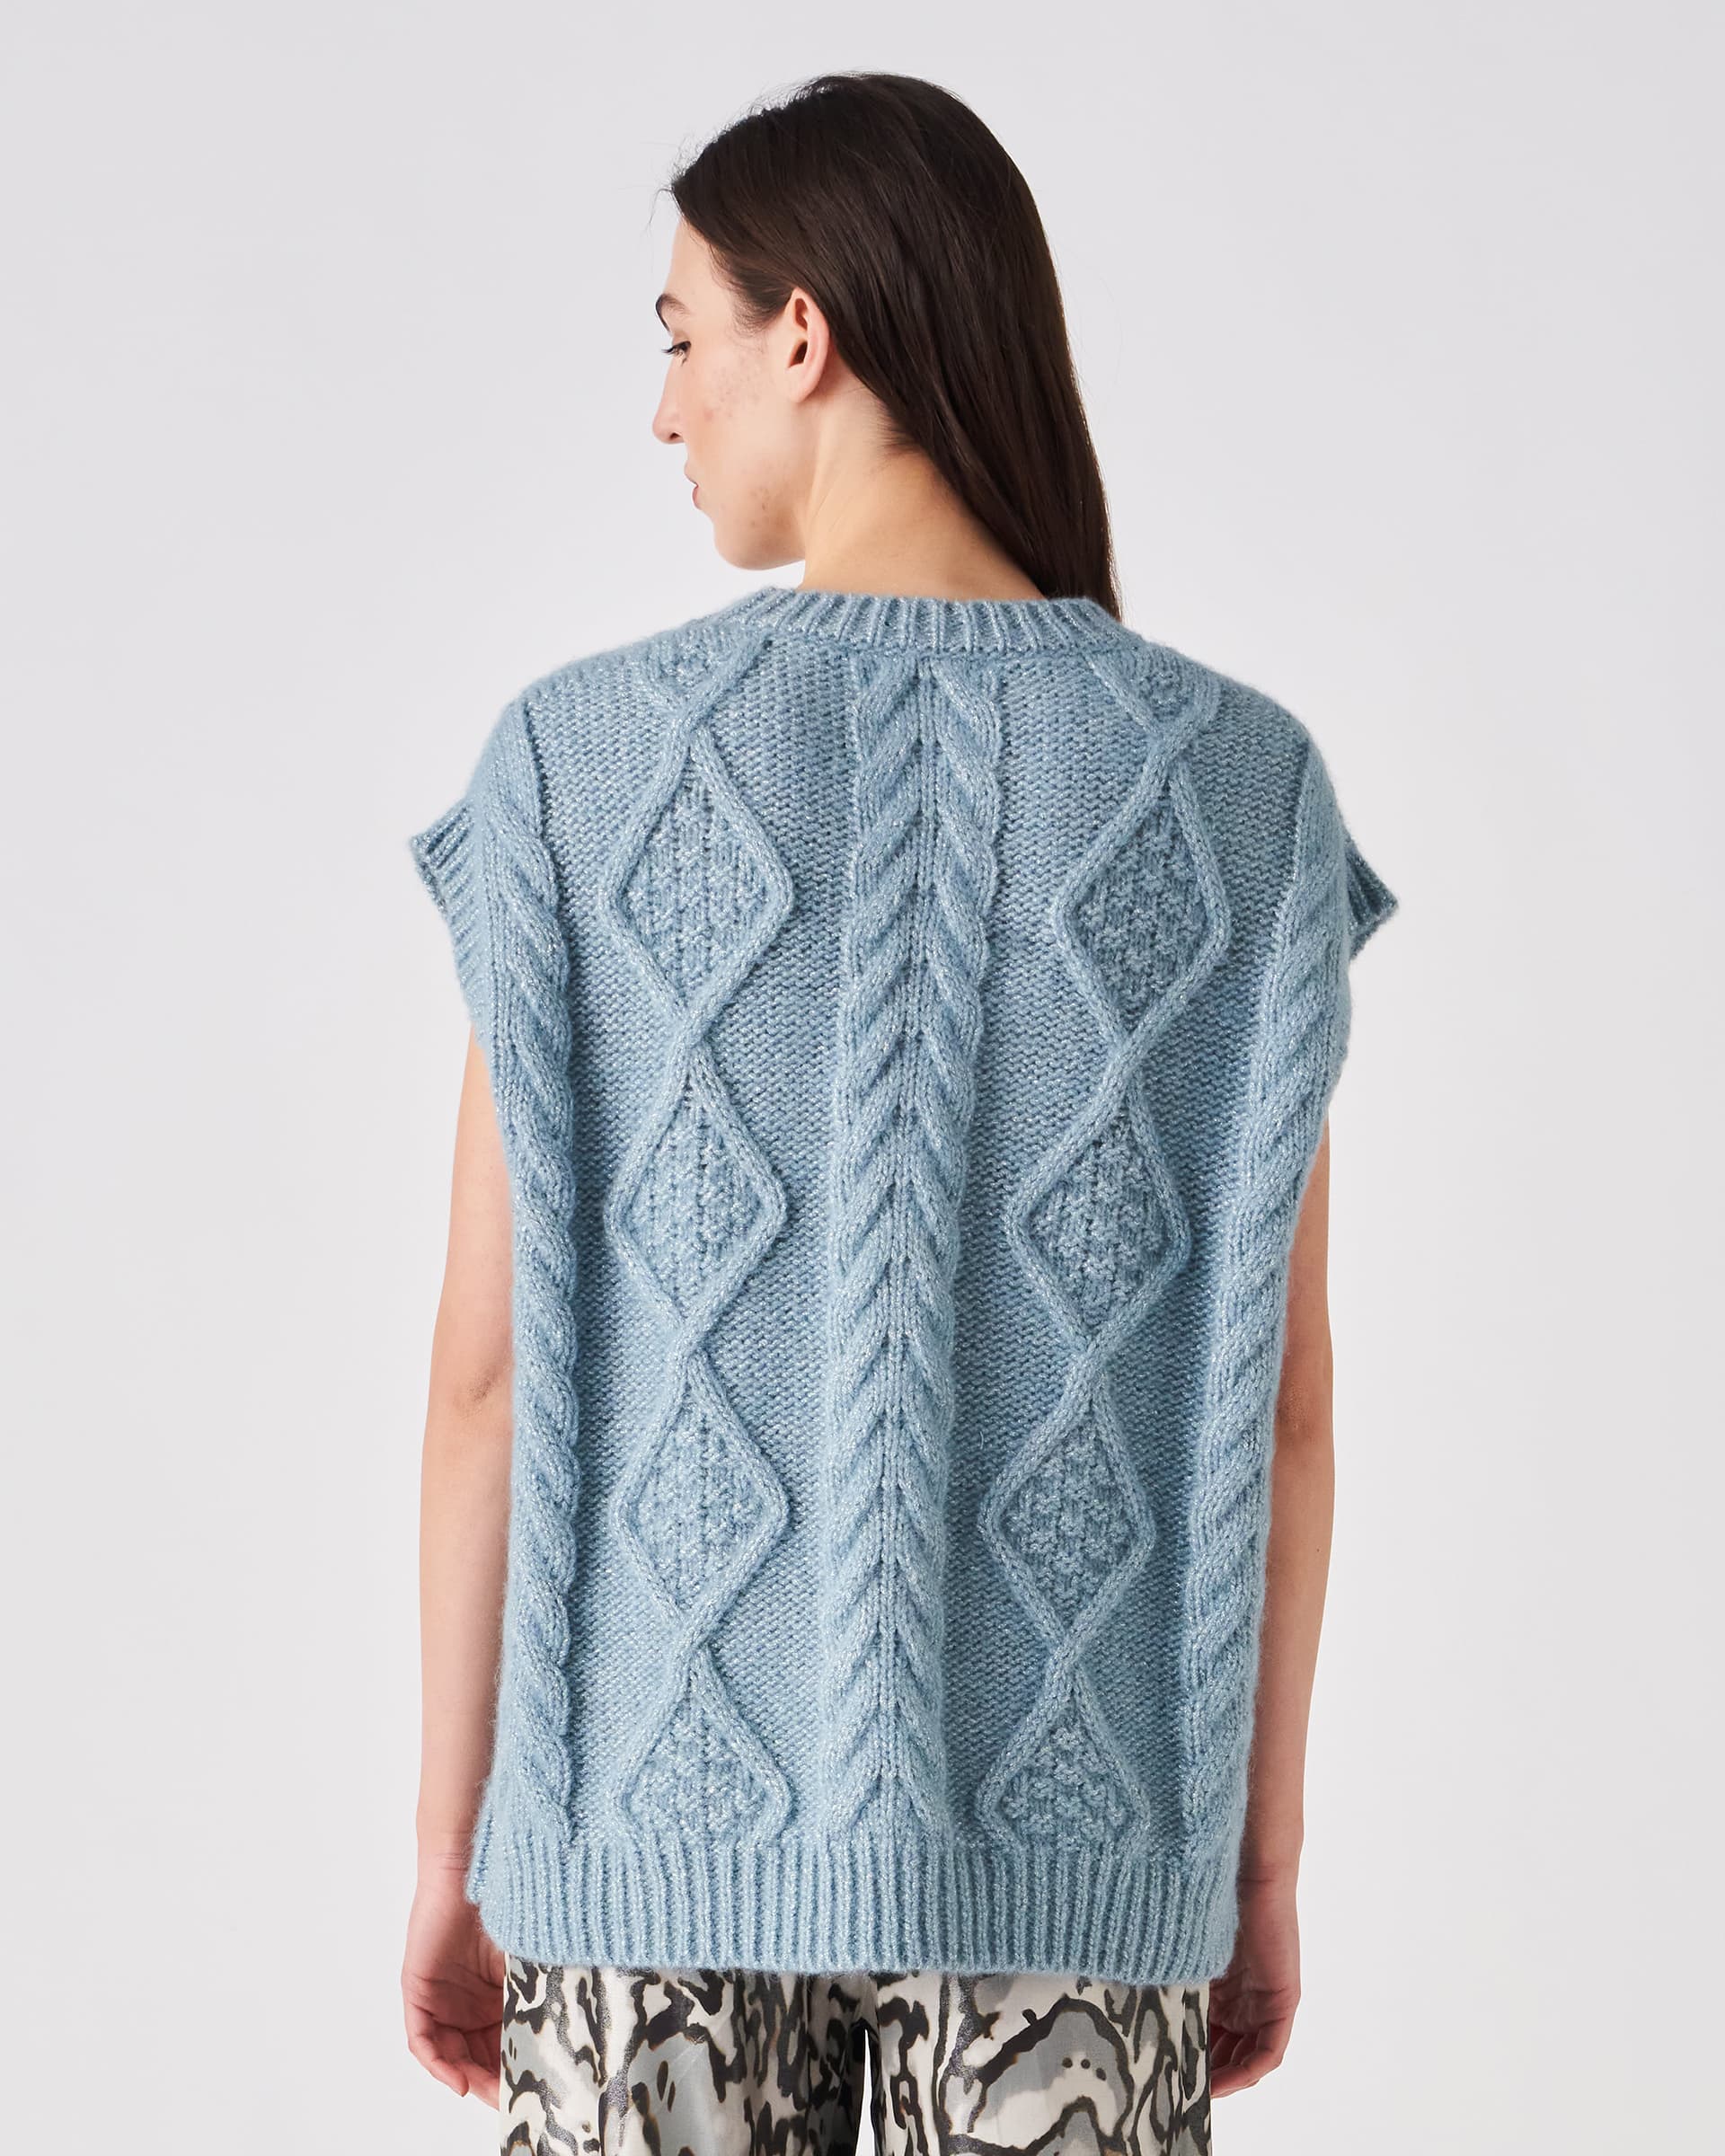 The Market Store | Over Cabled Knit Vest